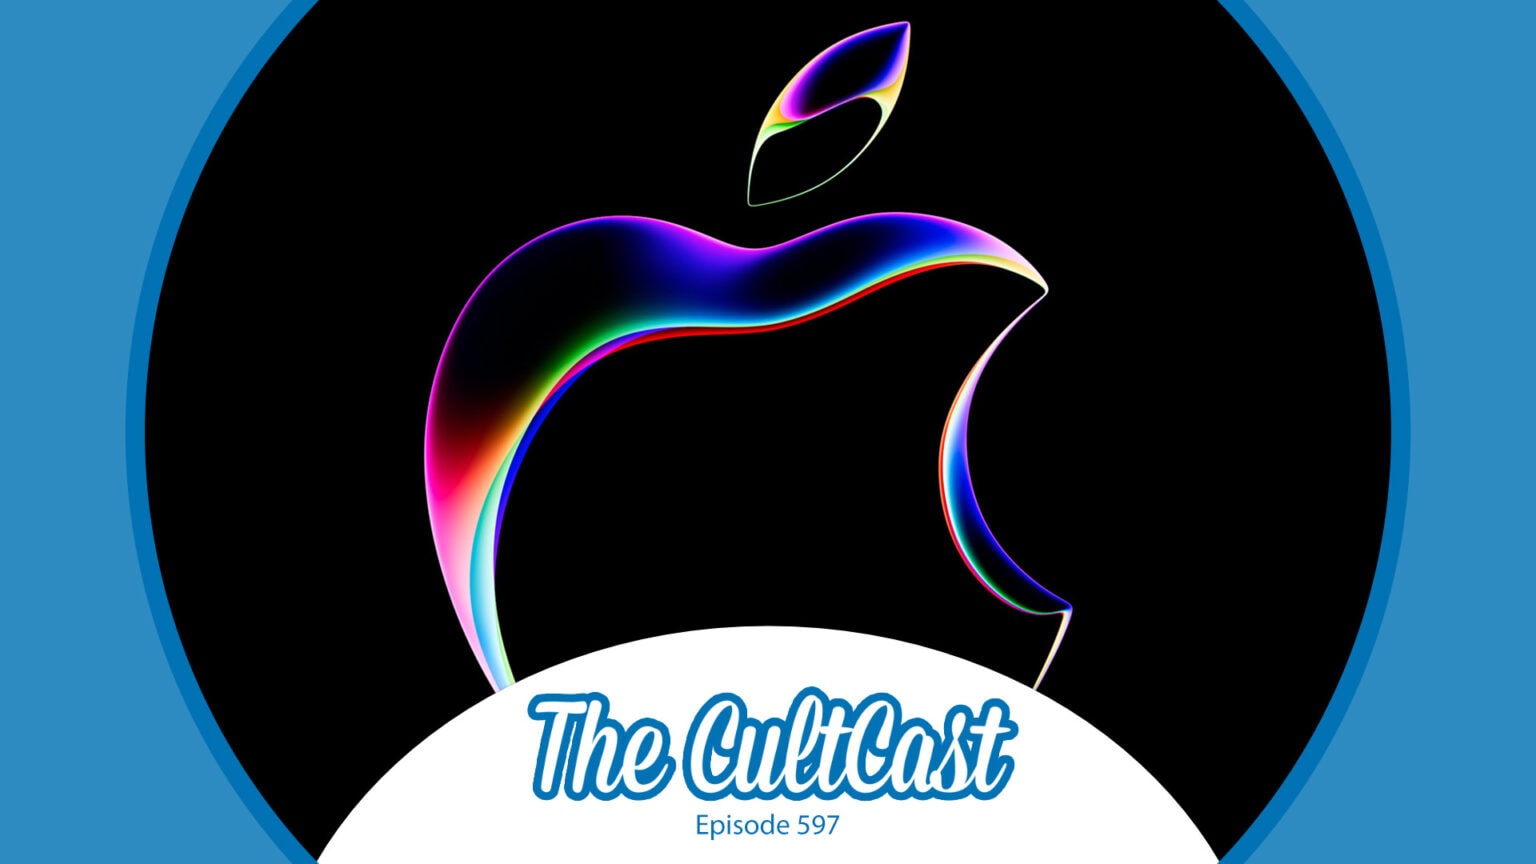 WWDC23 predictions on The CultCast.